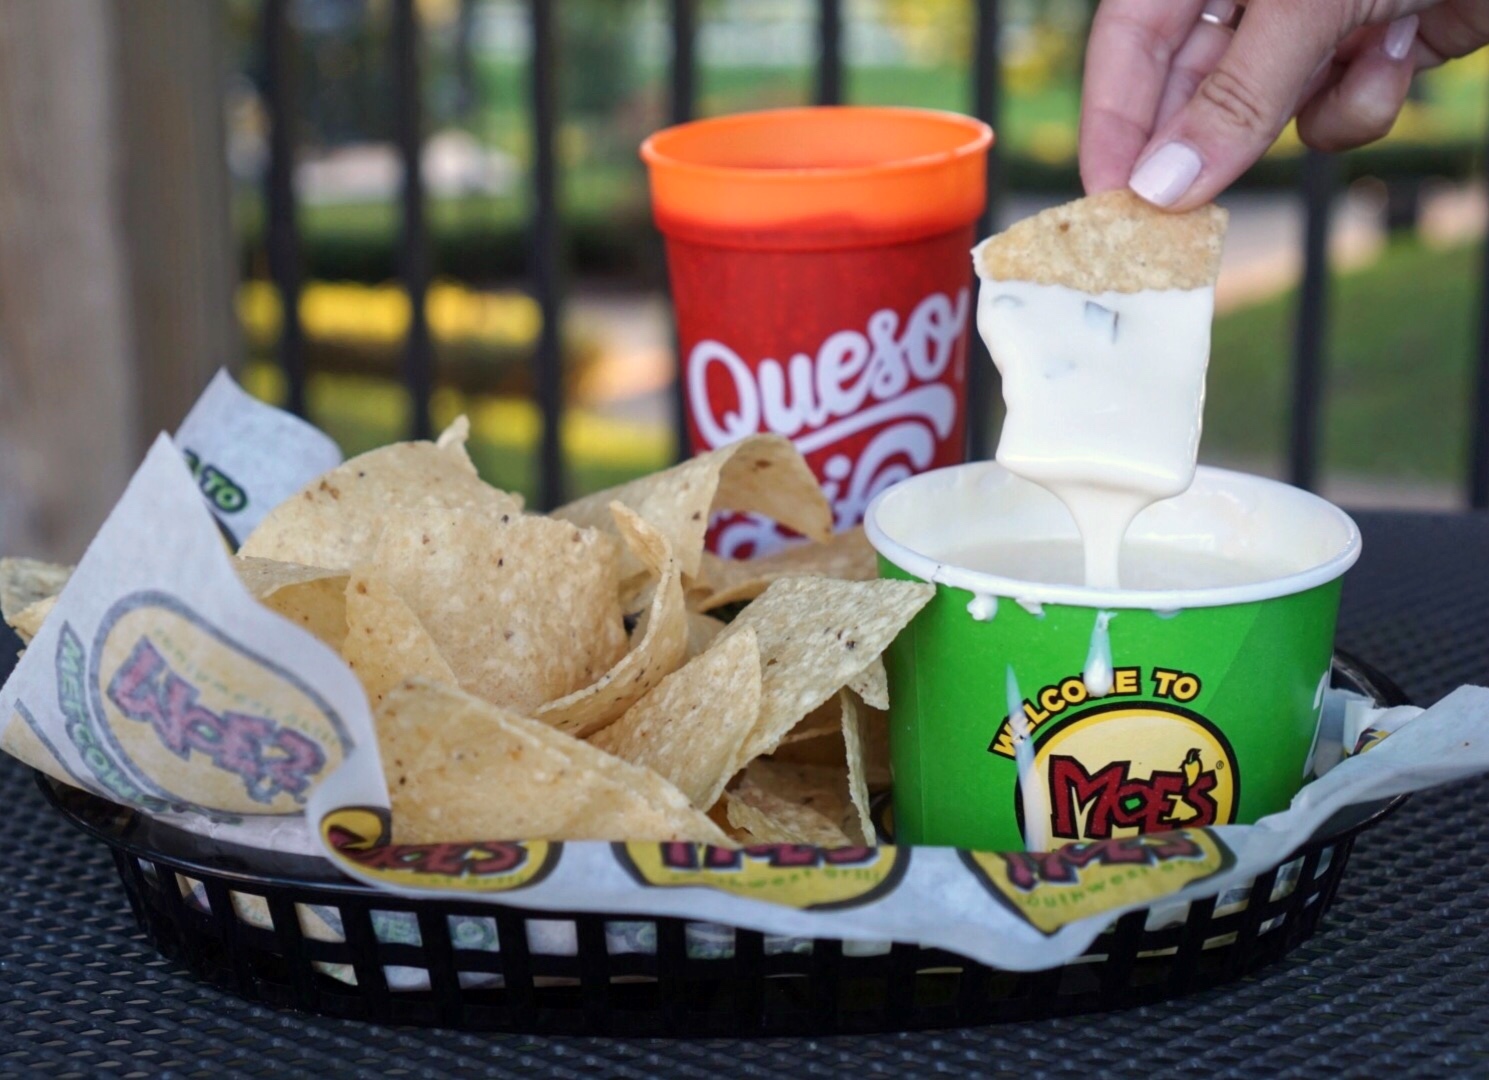 Get Your Free Queso at Moes on Free Queso Day | ATL Bucket List